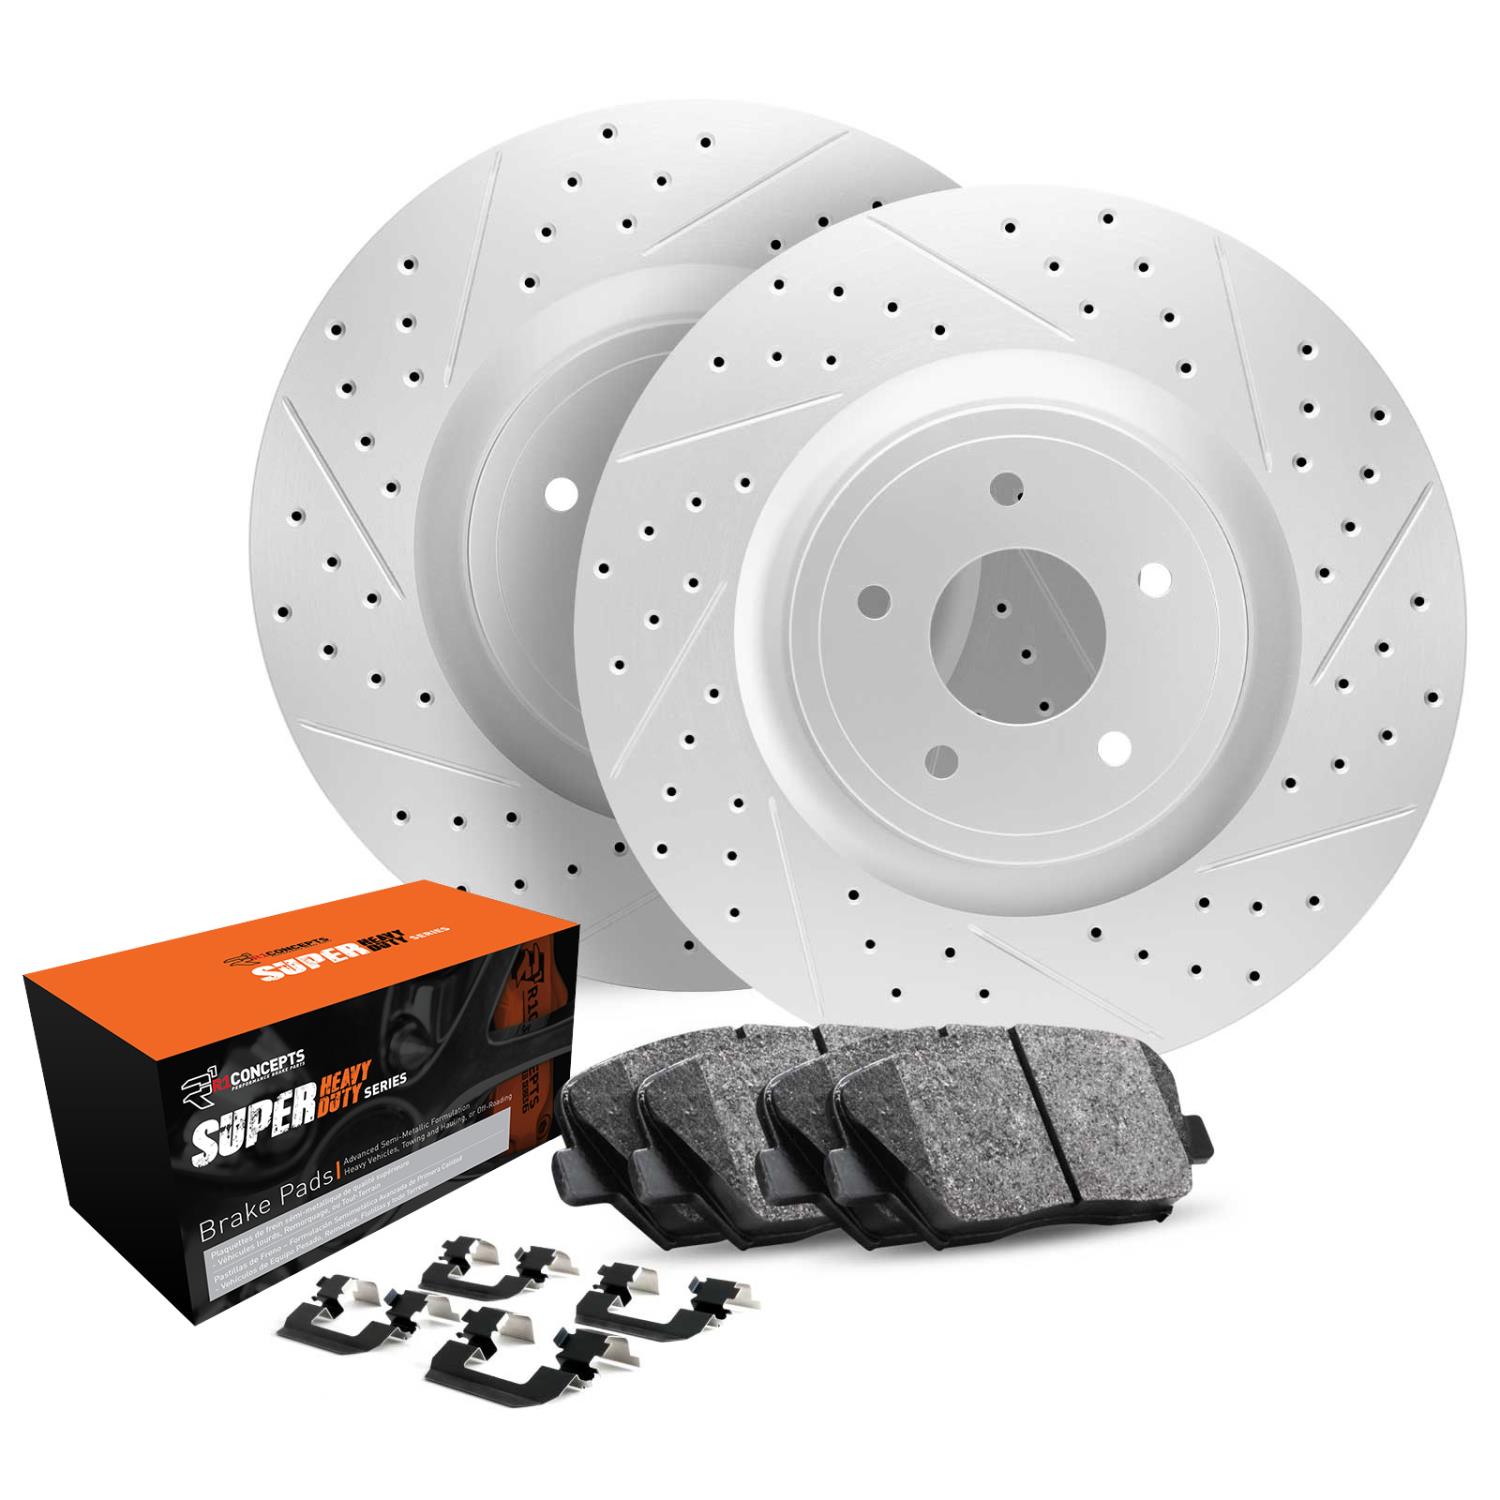 GEO-Carbon Drilled & Slotted Brake Rotor Set w/Super-Duty Pads & Hardware, Fits Select Fits Multiple Makes/Models